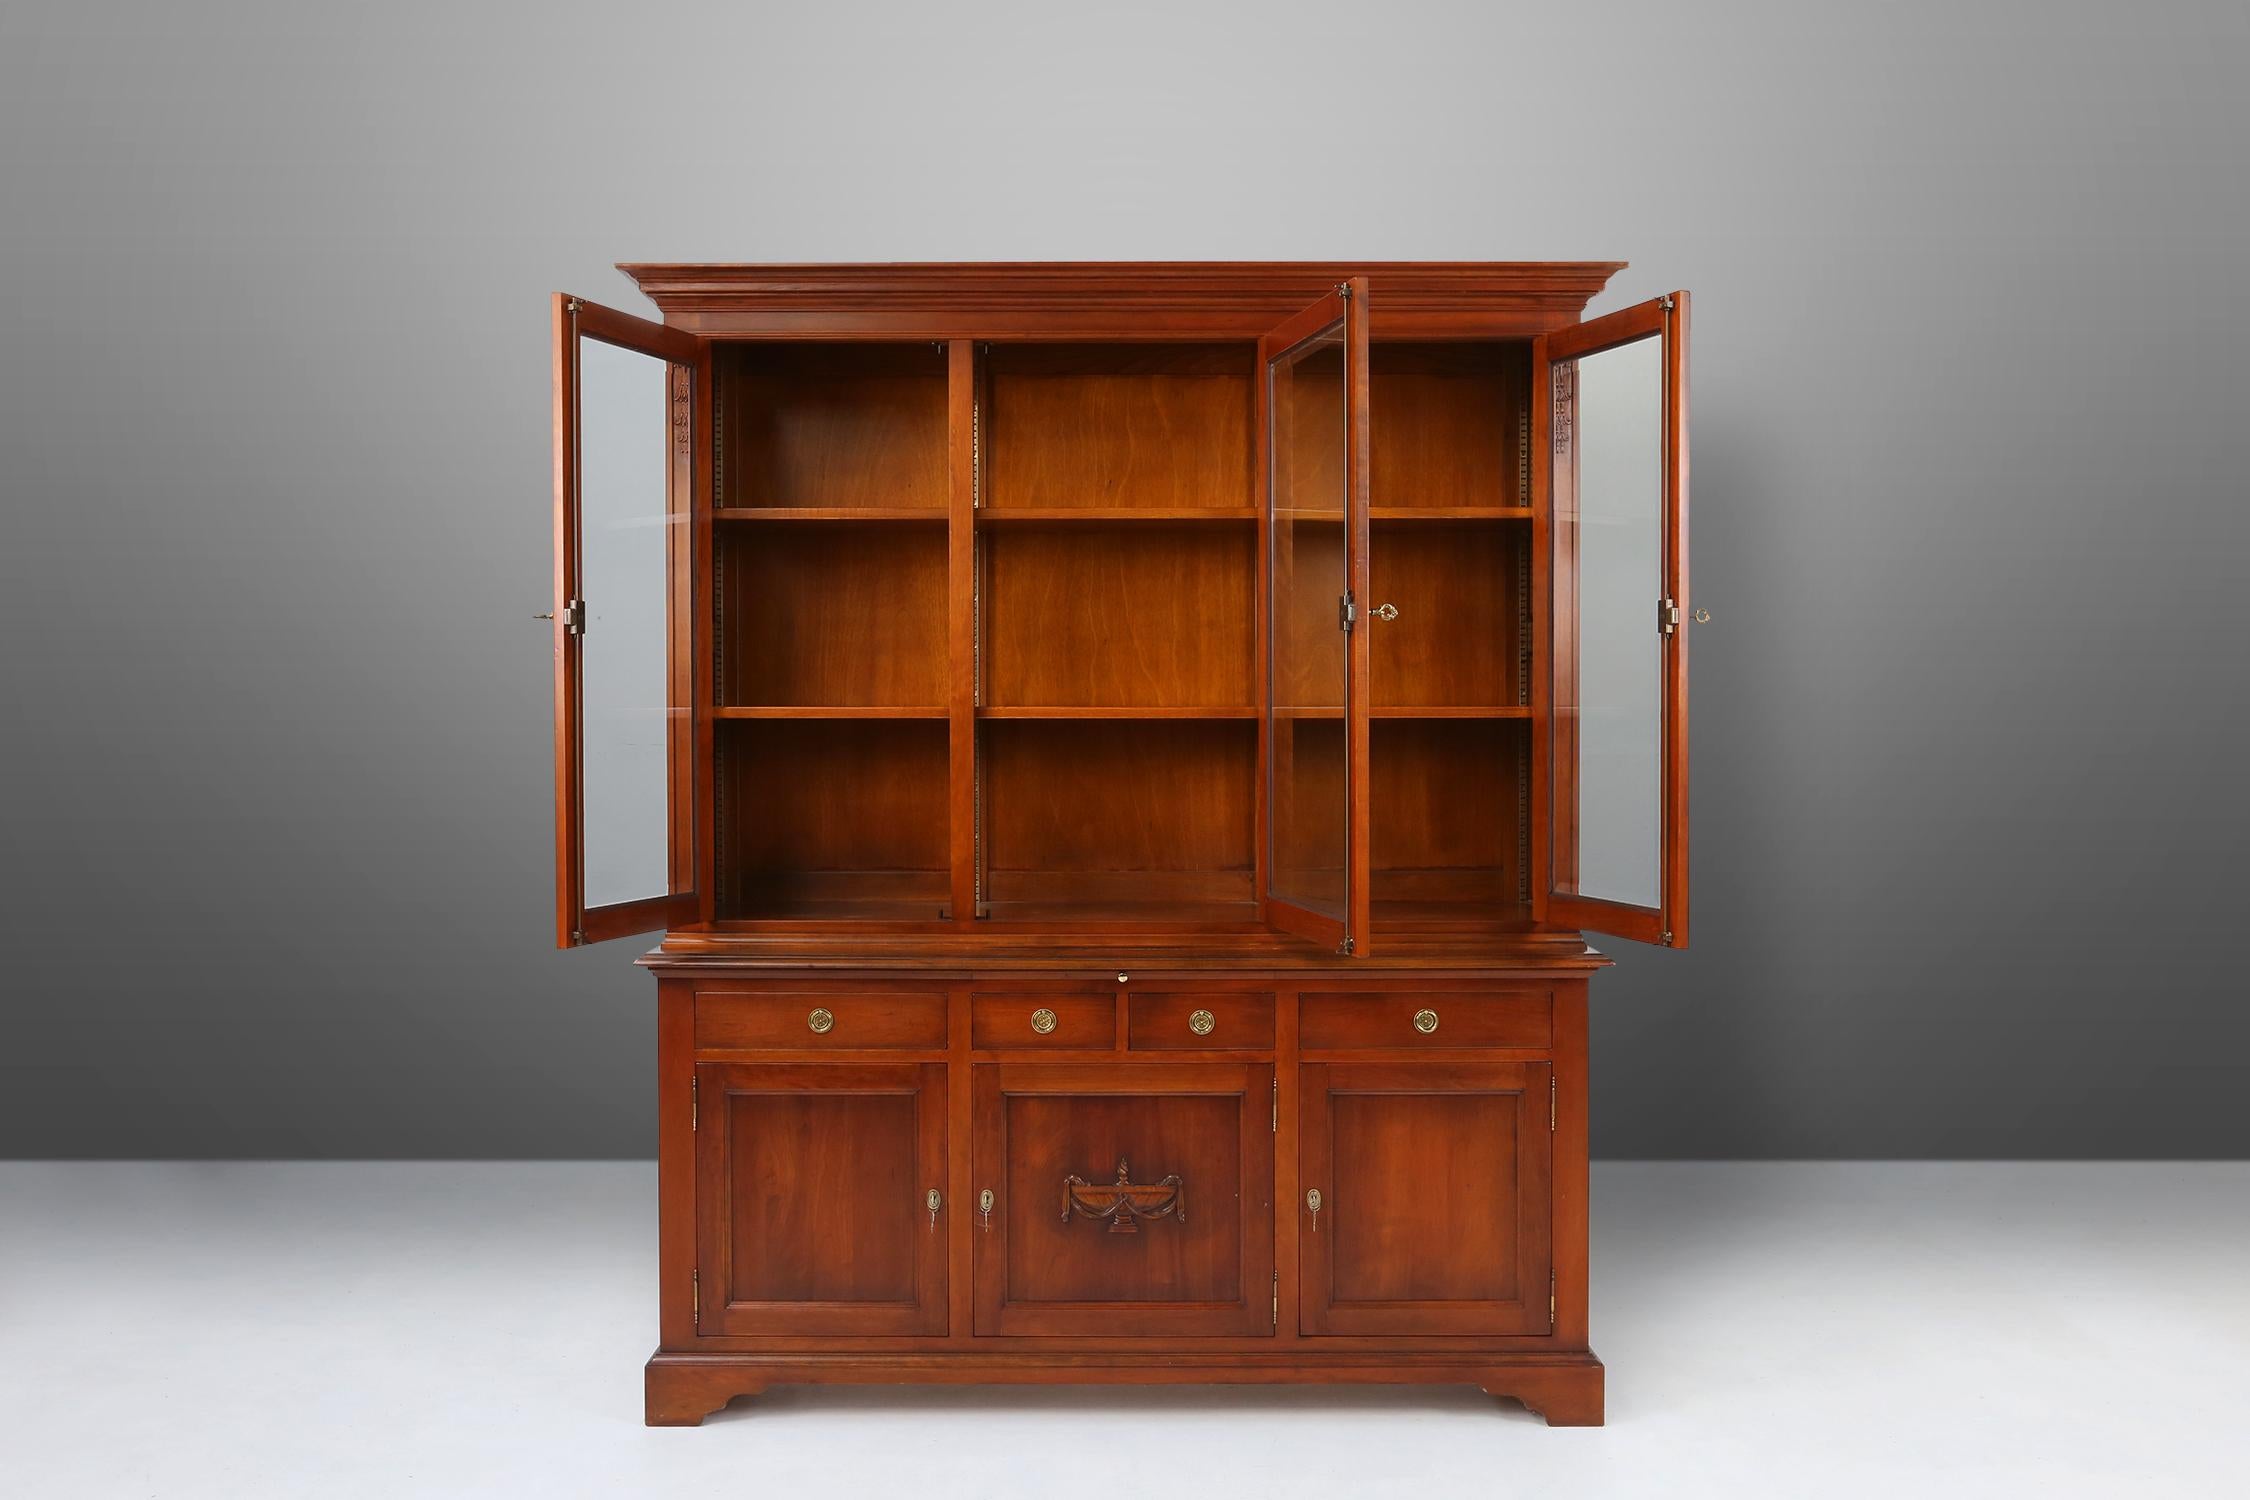 This exquisite bookcase is a true gem that will add a touch of elegance and sophistication to any home. Crafted with attention to detail. Has warm tones and stunning grain patterns. The deep, lustrous finish enhances the natural beauty of the wood,